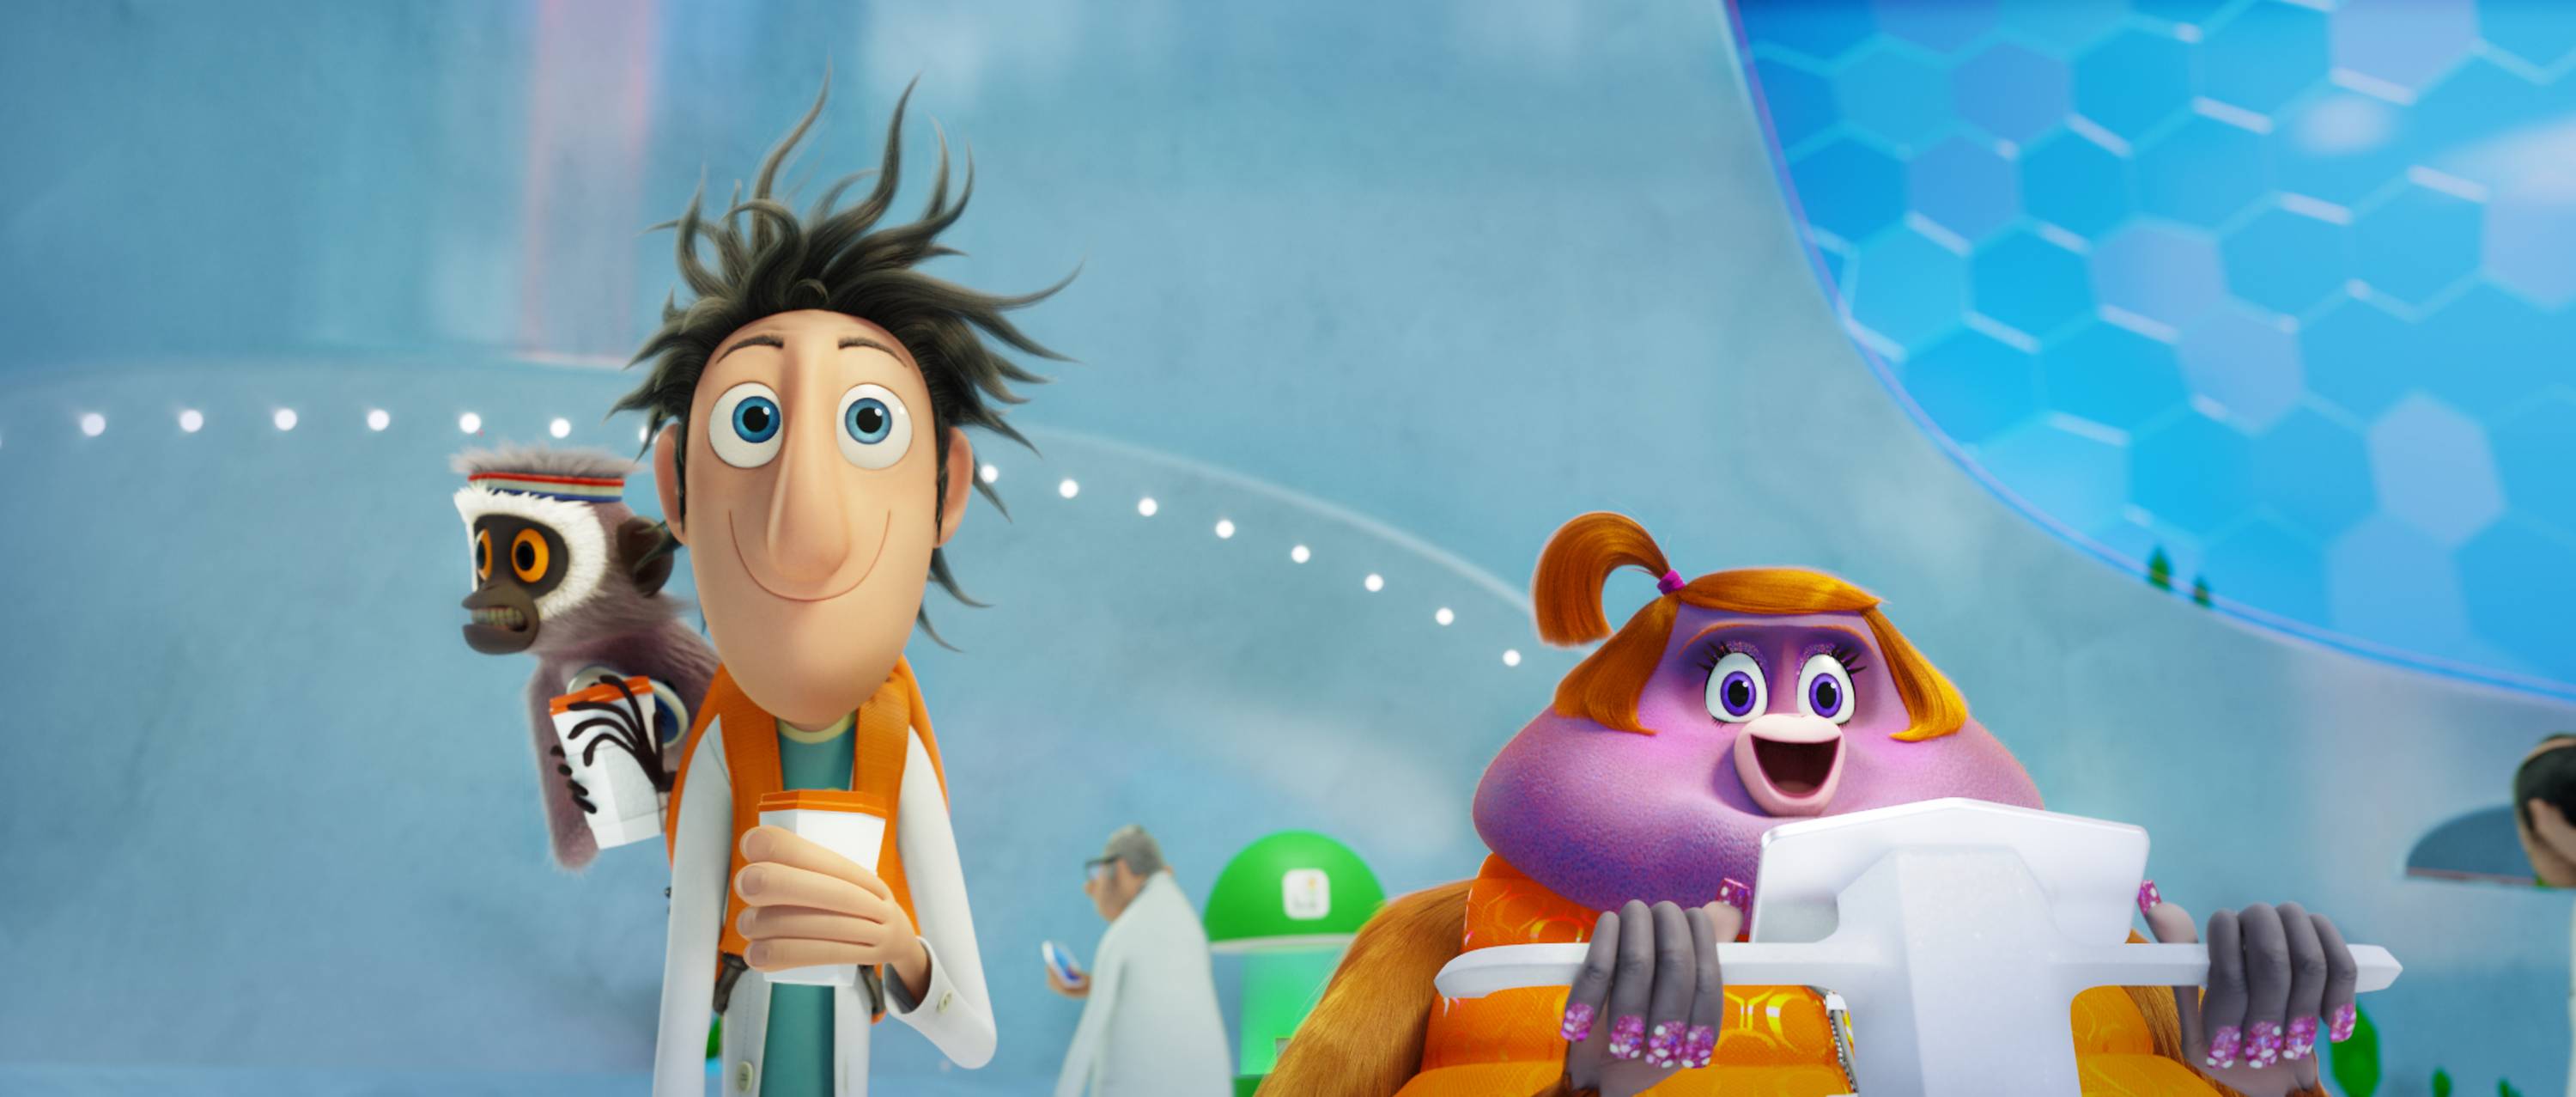 Wallpapers Cloudy 2 Revenge of GMO family Cloudy with a Chance of Meatballs 2 on the desktop